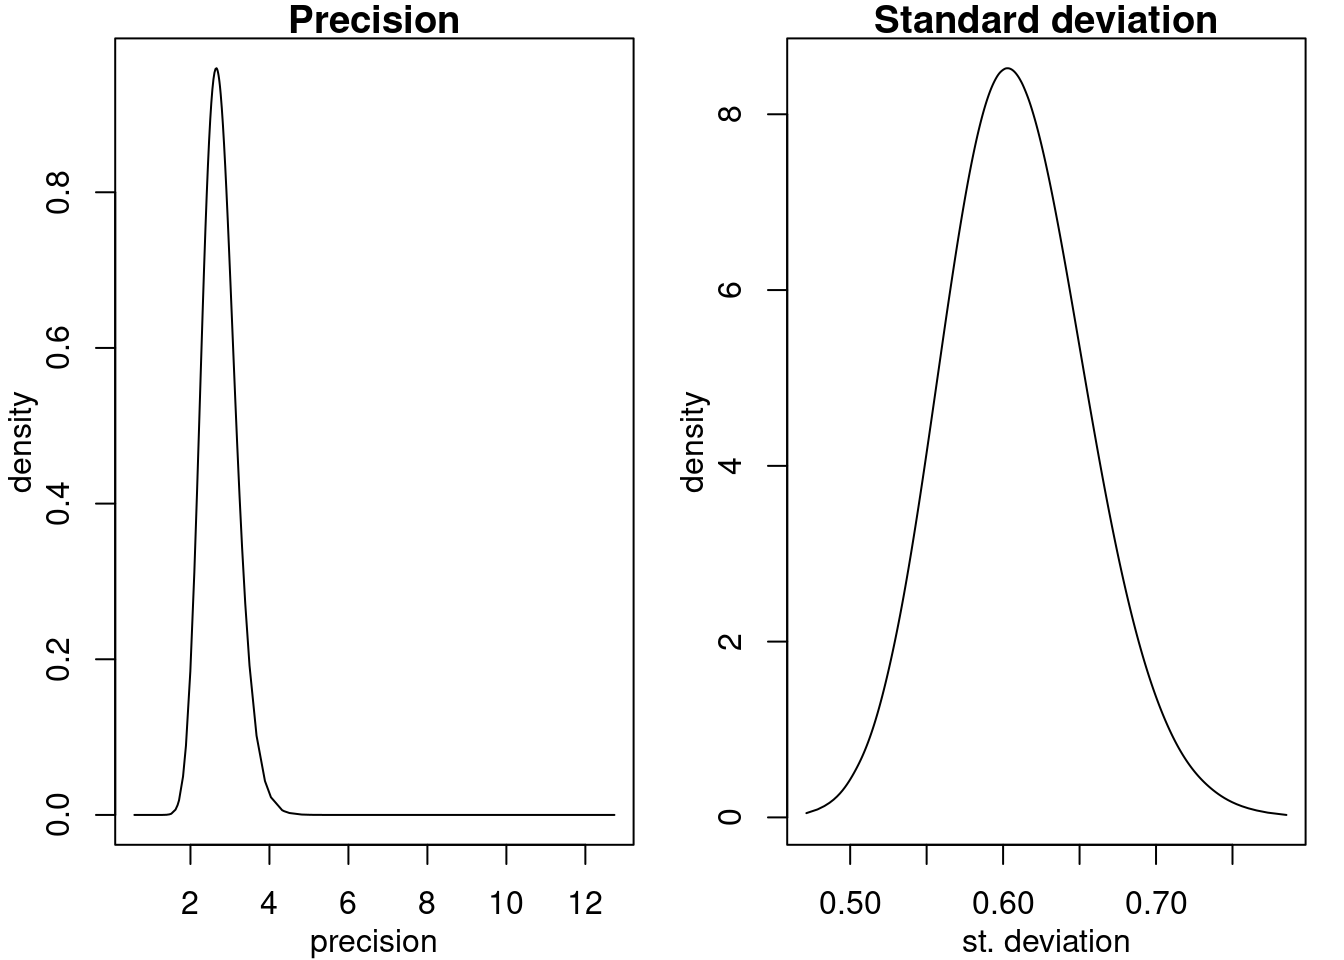 Posterior marginals of the precision (top) and the standard deviation (bottom).